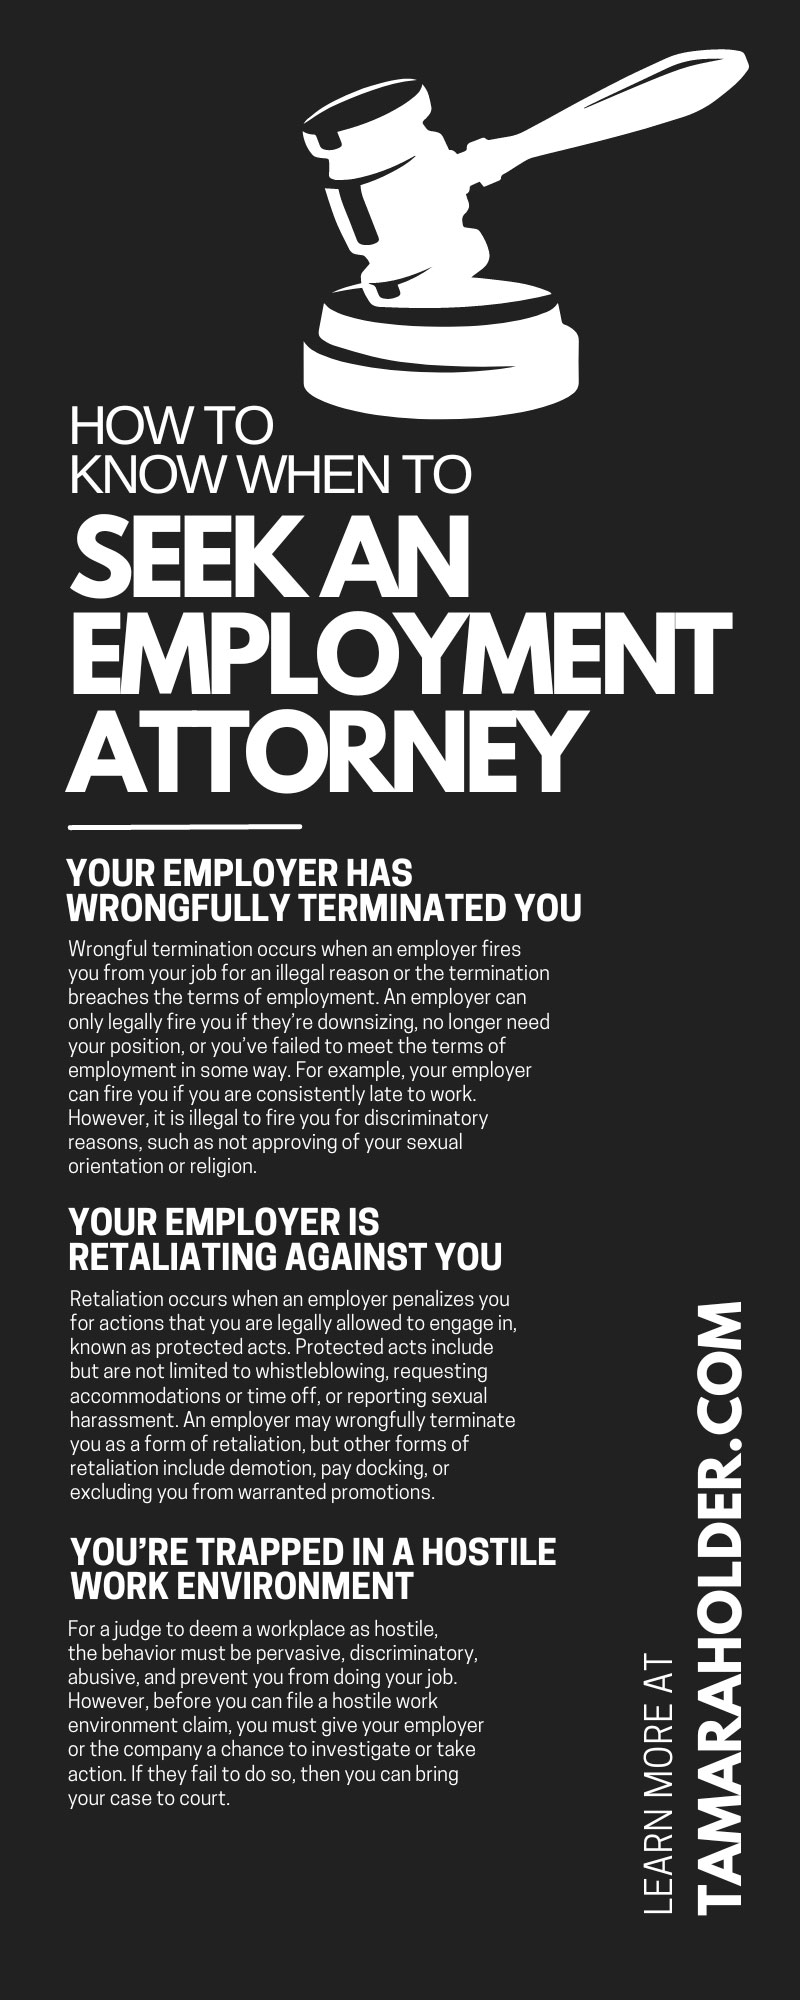 How To Know When To Seek an Employment Attorney